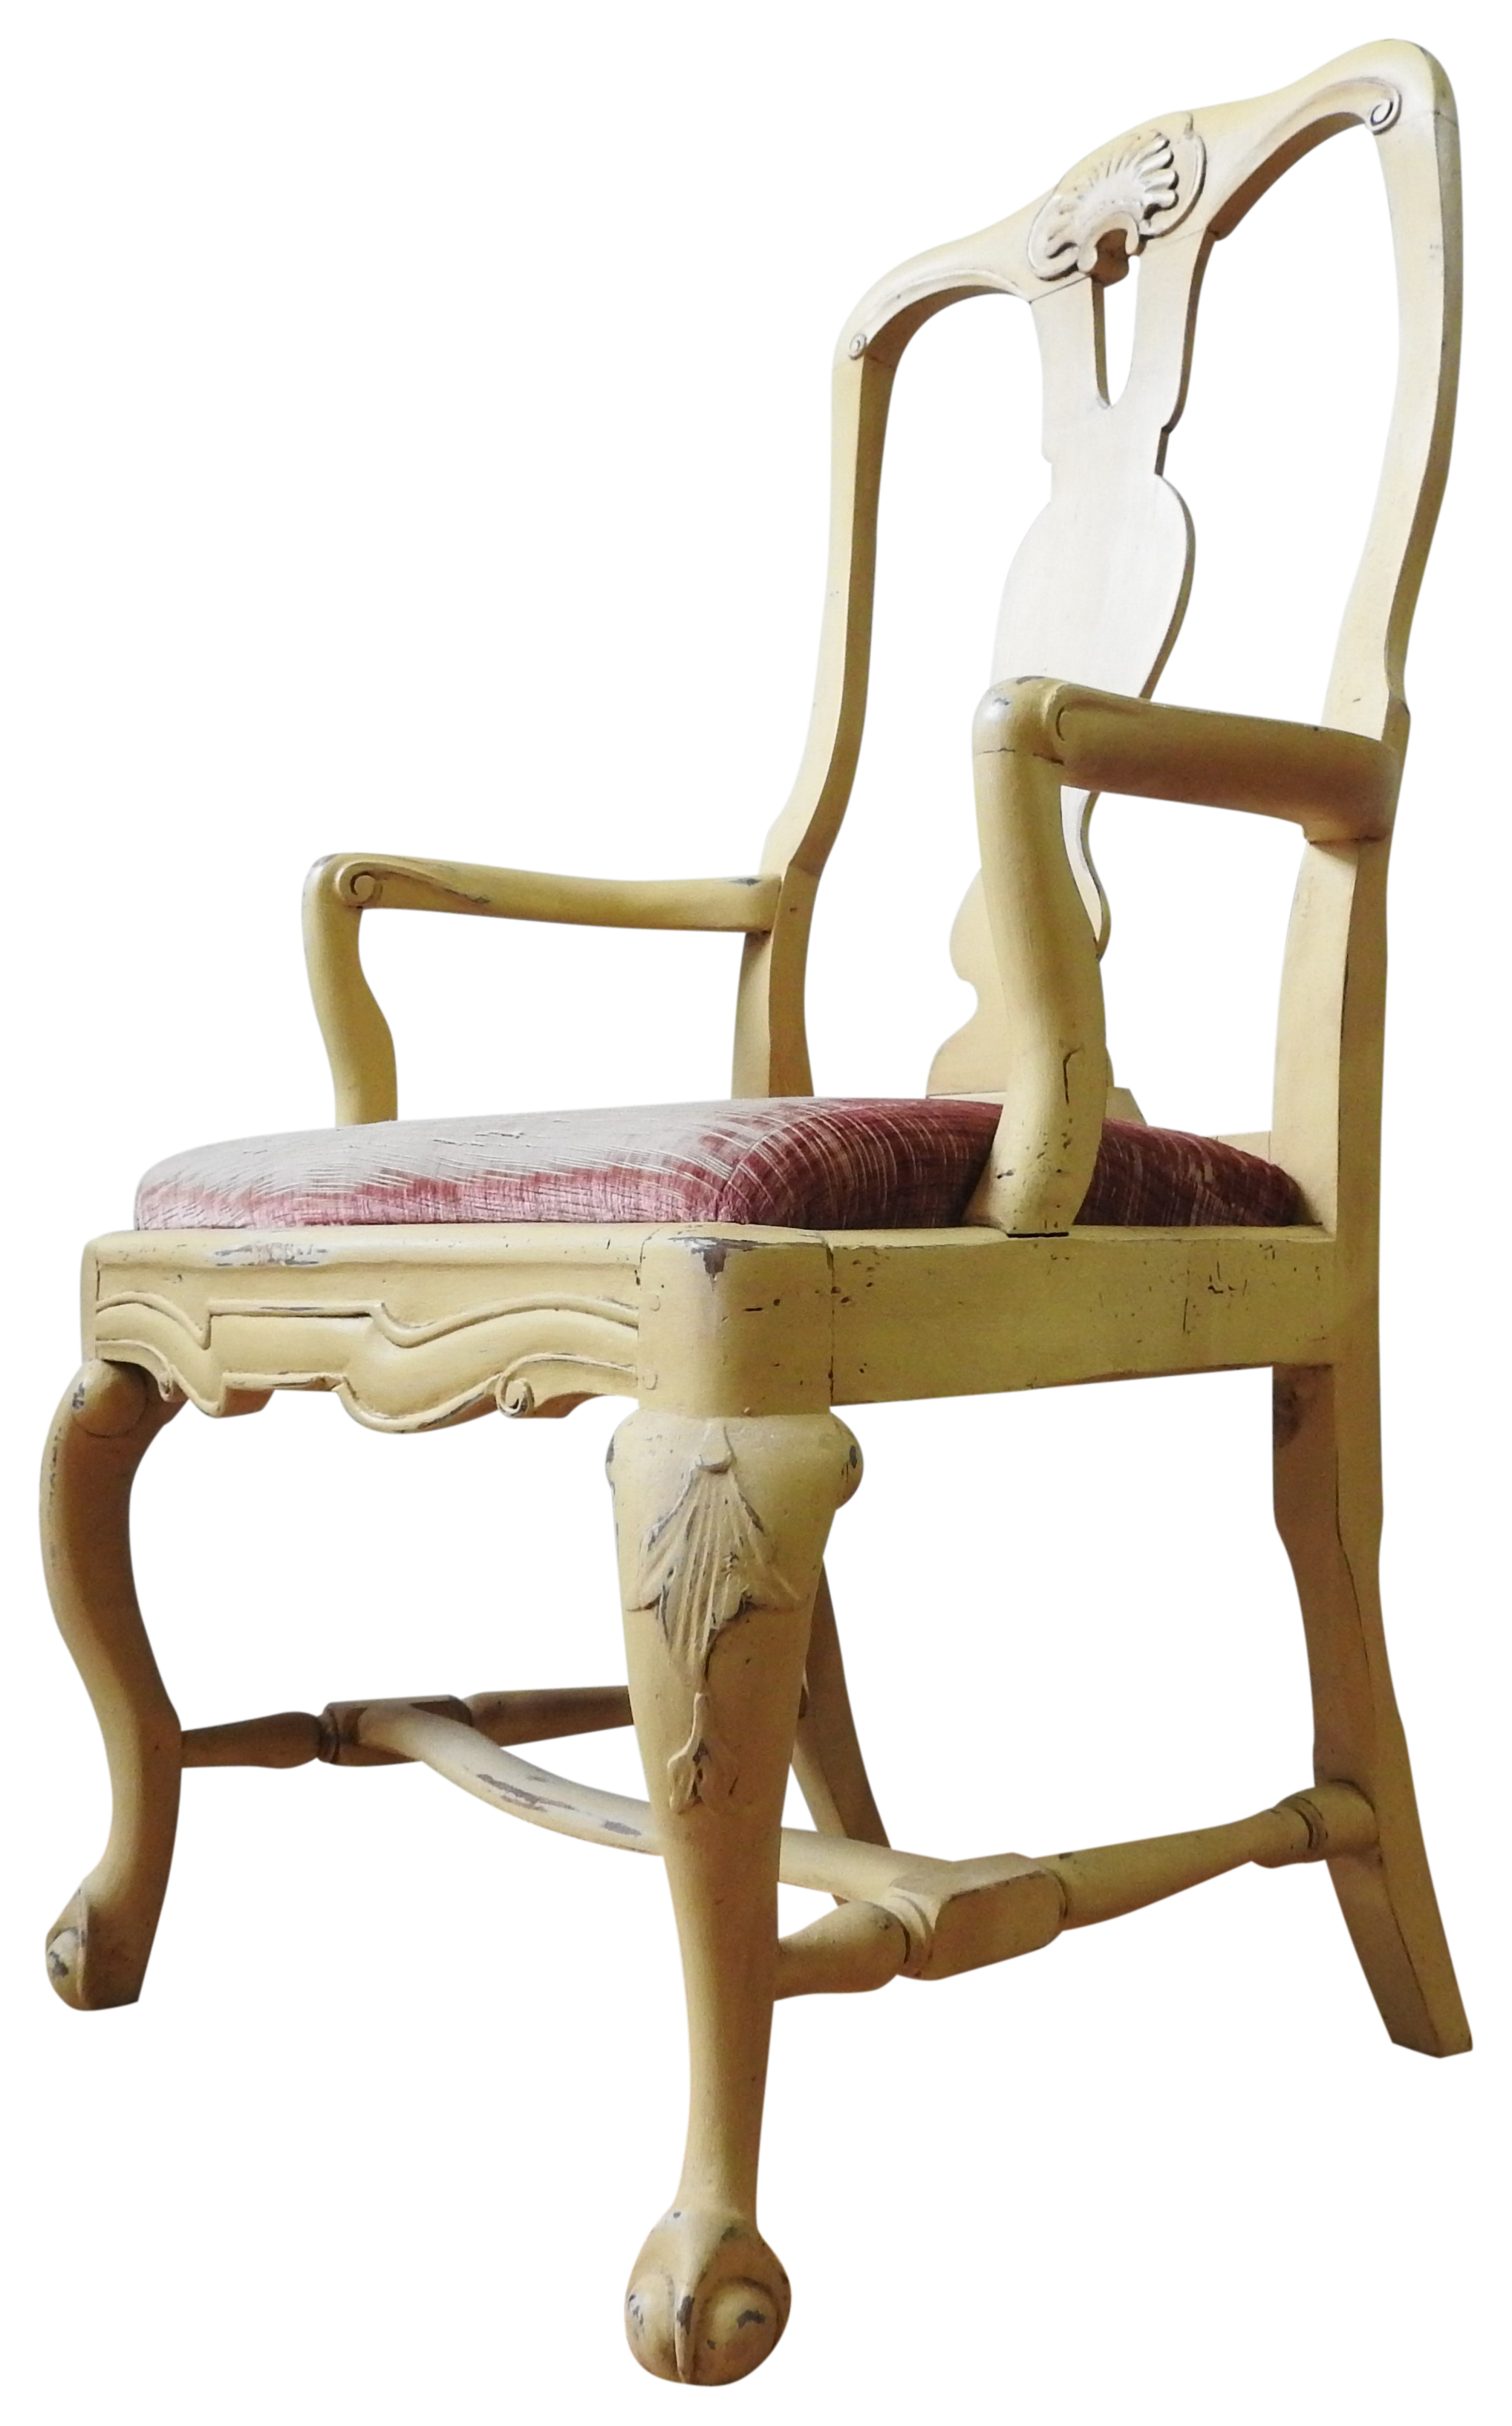 A QUEEN ANNE STYLE ELBOW CHAIR, with pierced vasiform splat and scroll arms, the cabriole legs